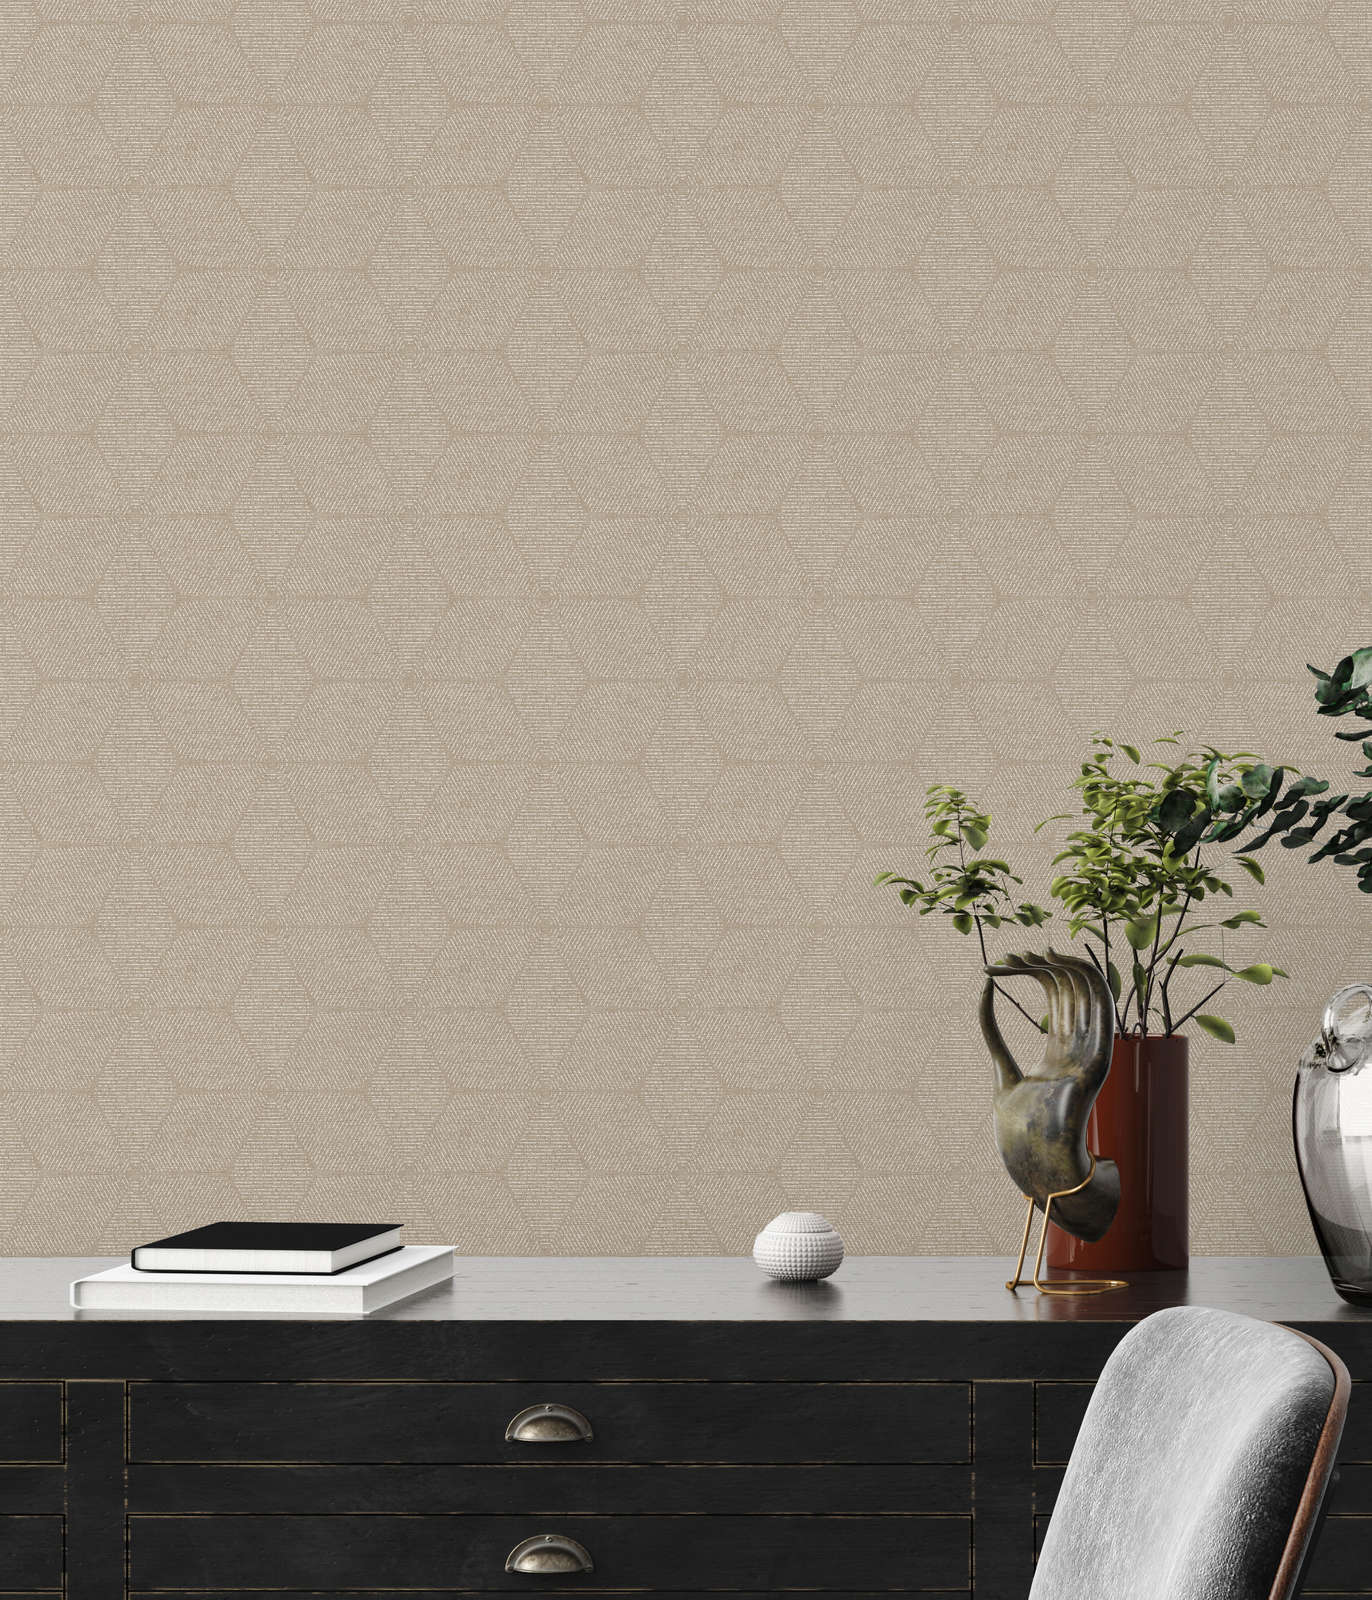             Non-woven wallpaper in natural style - beige, white
        